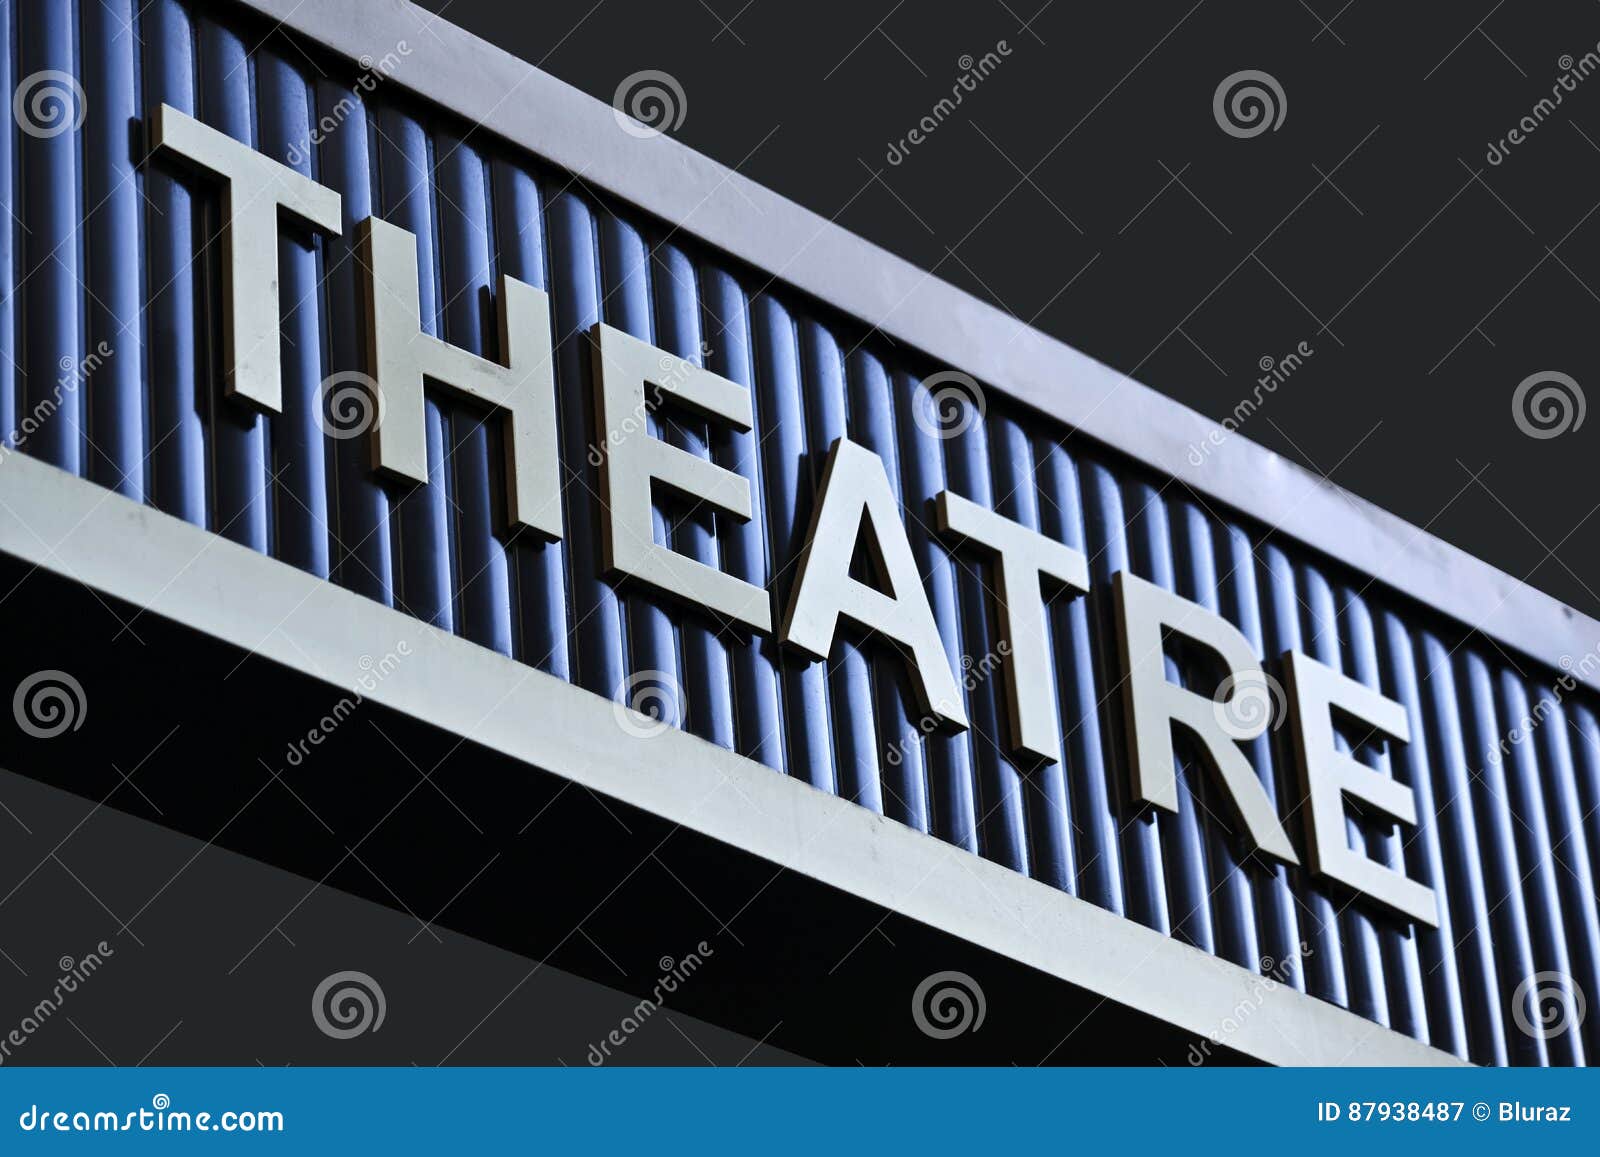 Signs And Inscriptions Theatre On The Streets Stock Image Image Of City Building 87938487